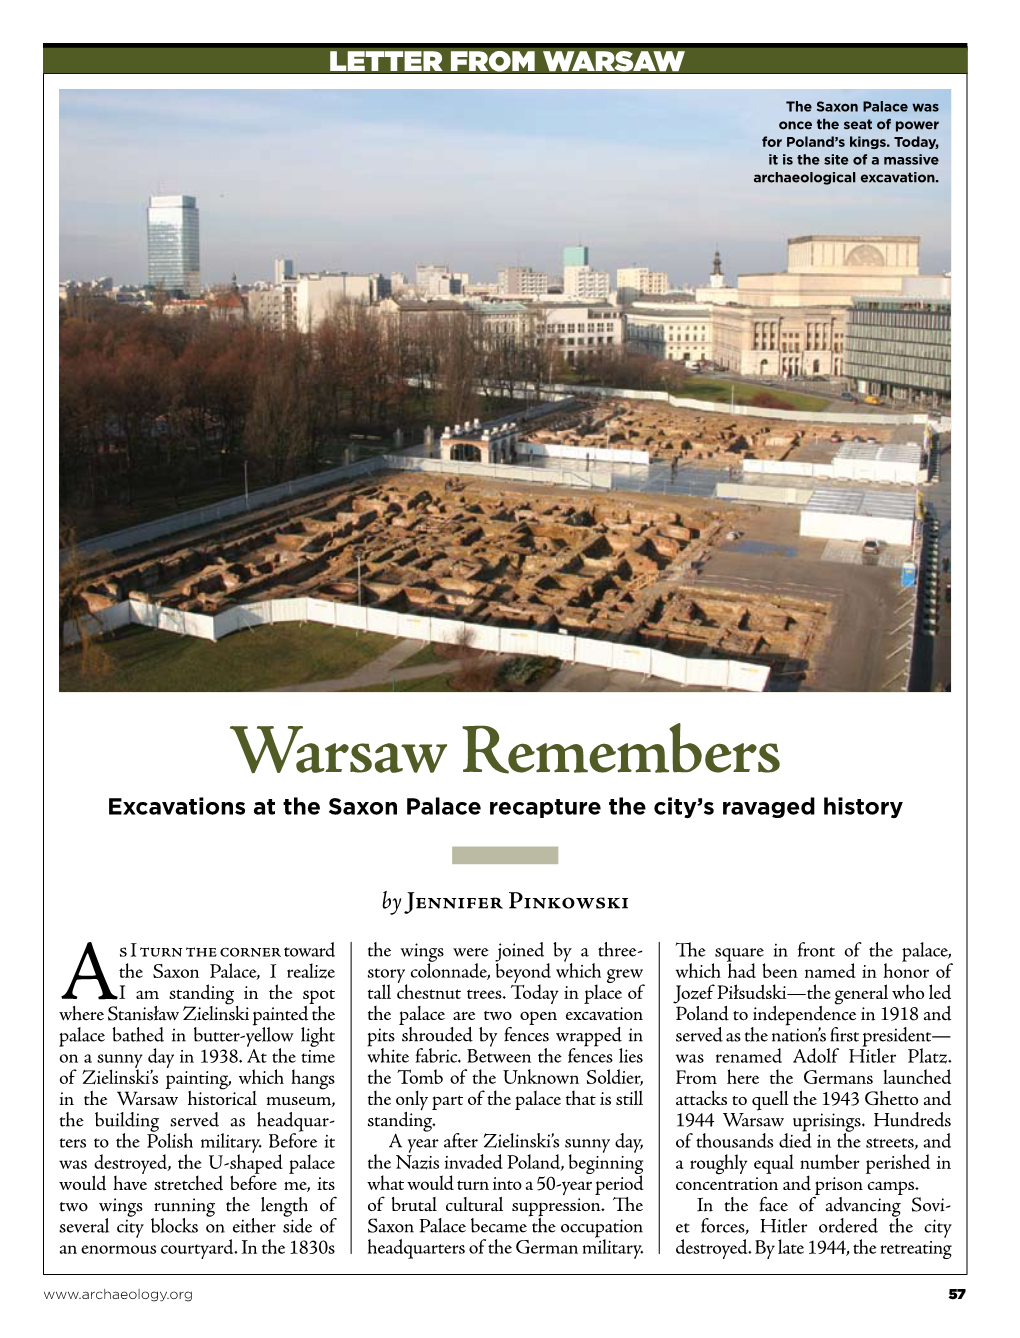 Warsaw Remembers Excavations at the Saxon Palace Recapture the City’S Ravaged History